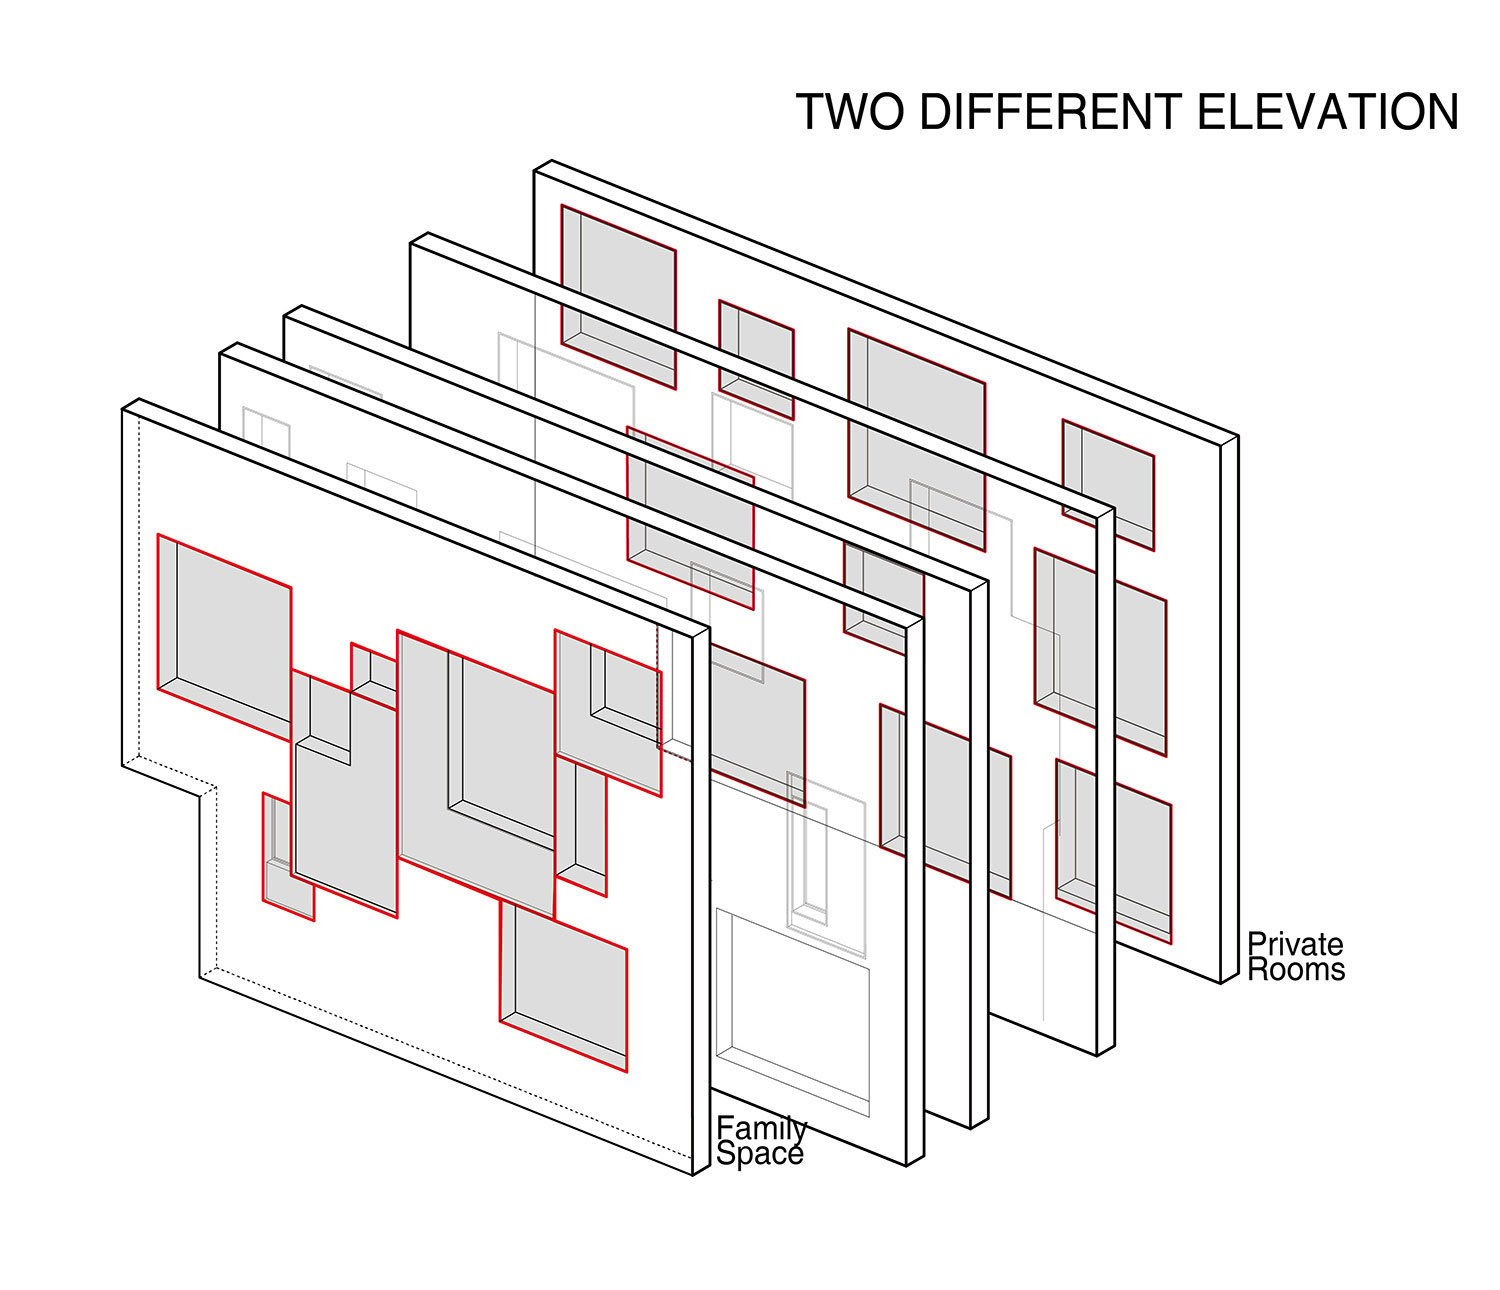 Two Different Elevation | Unsangdong Architects Co., Ltd.